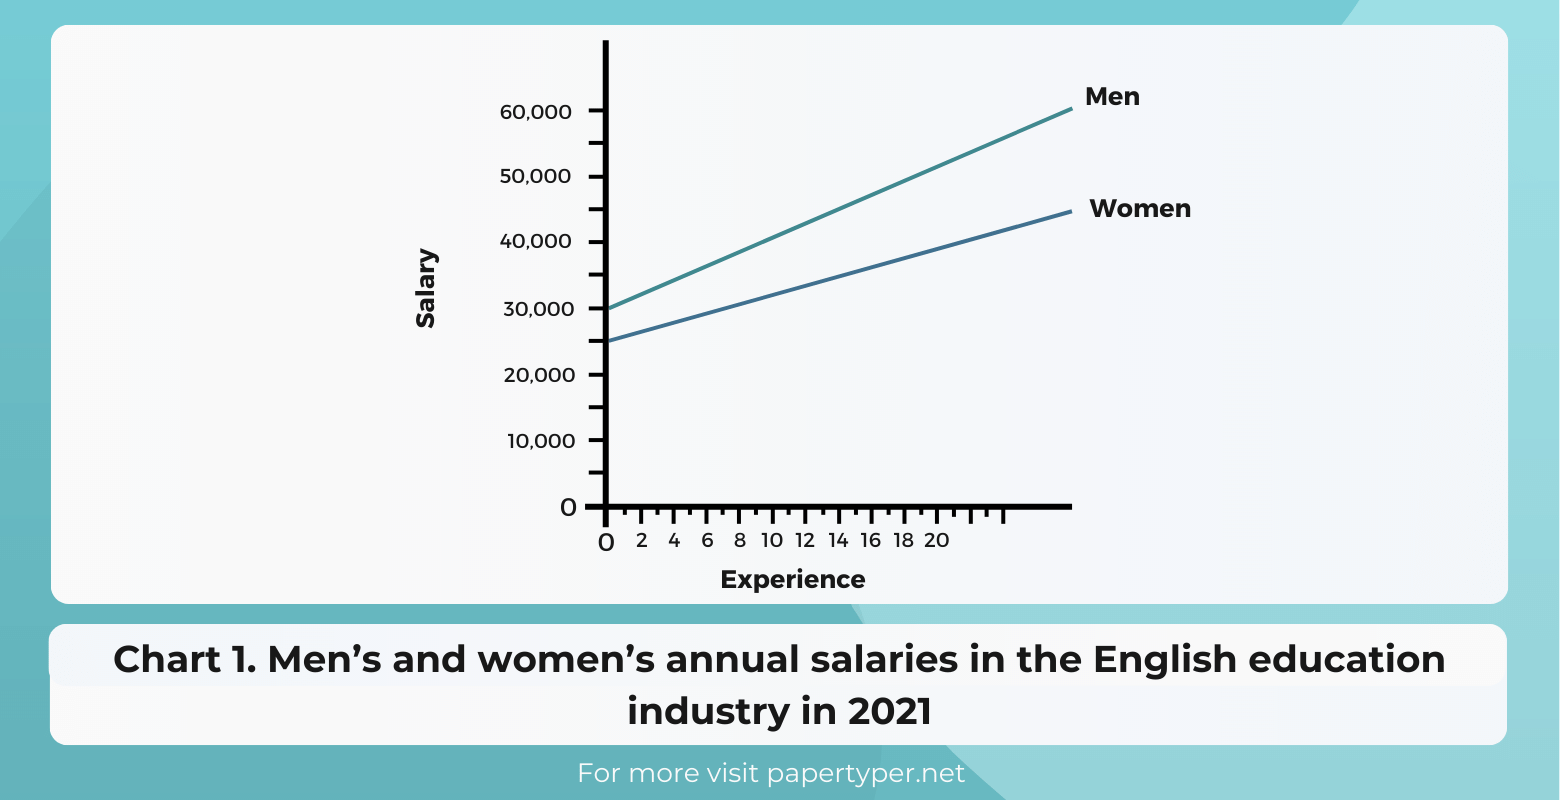 Men’s and women’s annual salaries in the English education industry in 2021